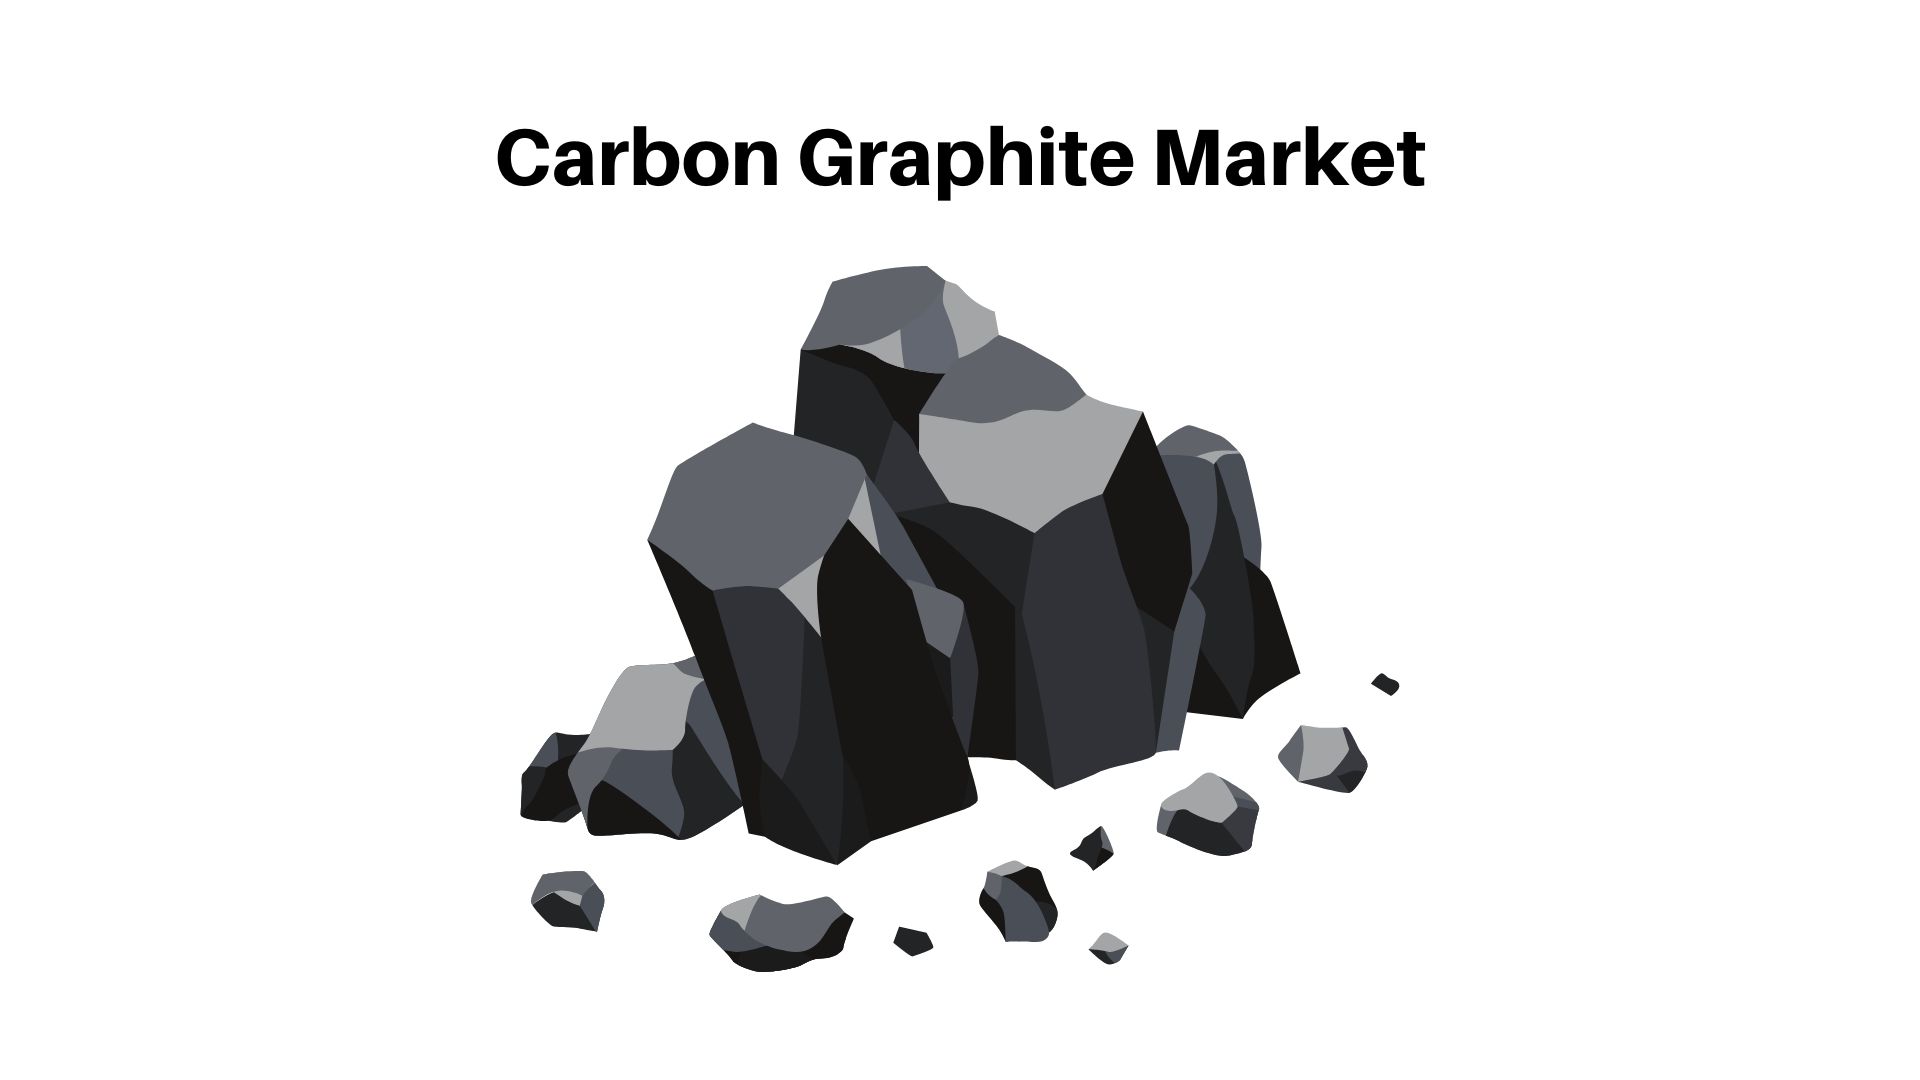 Carbon Graphite Market Will Grow To USD 57 Billion by 2032